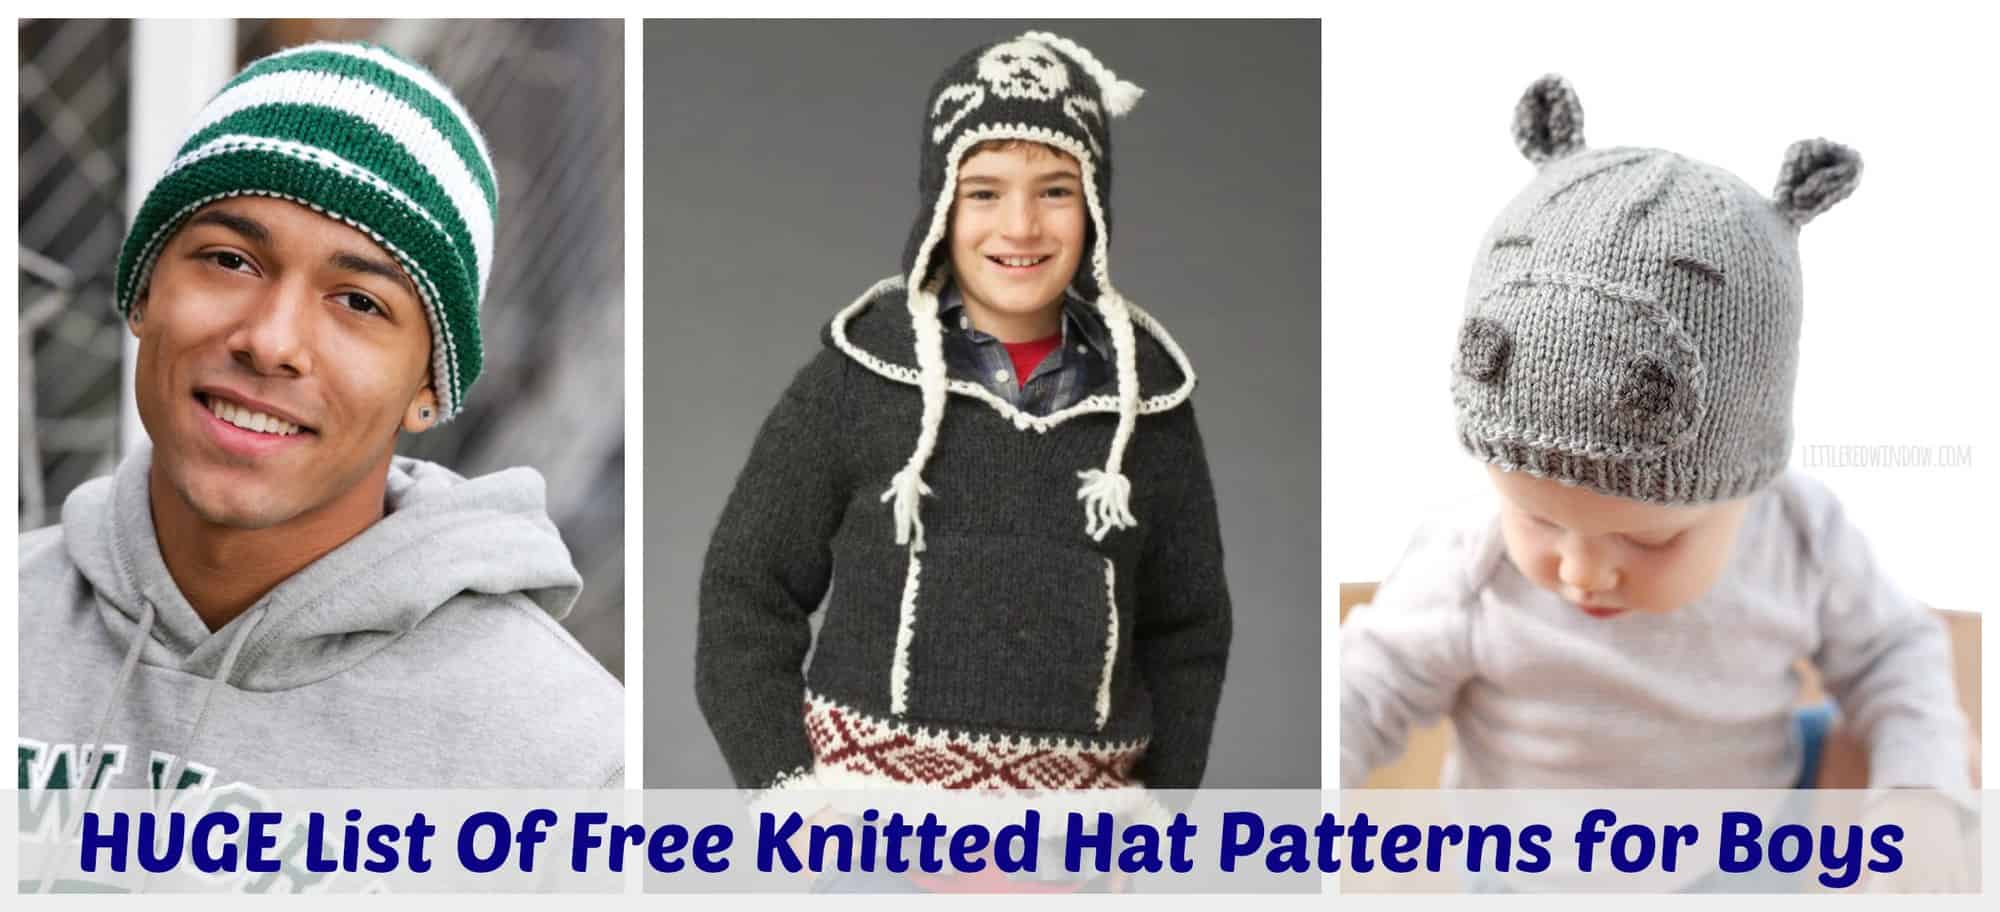 Boys Knitted Hat Patterns The Huge List Of Free Knitted Hat Patterns For Boys Little Miss Kate